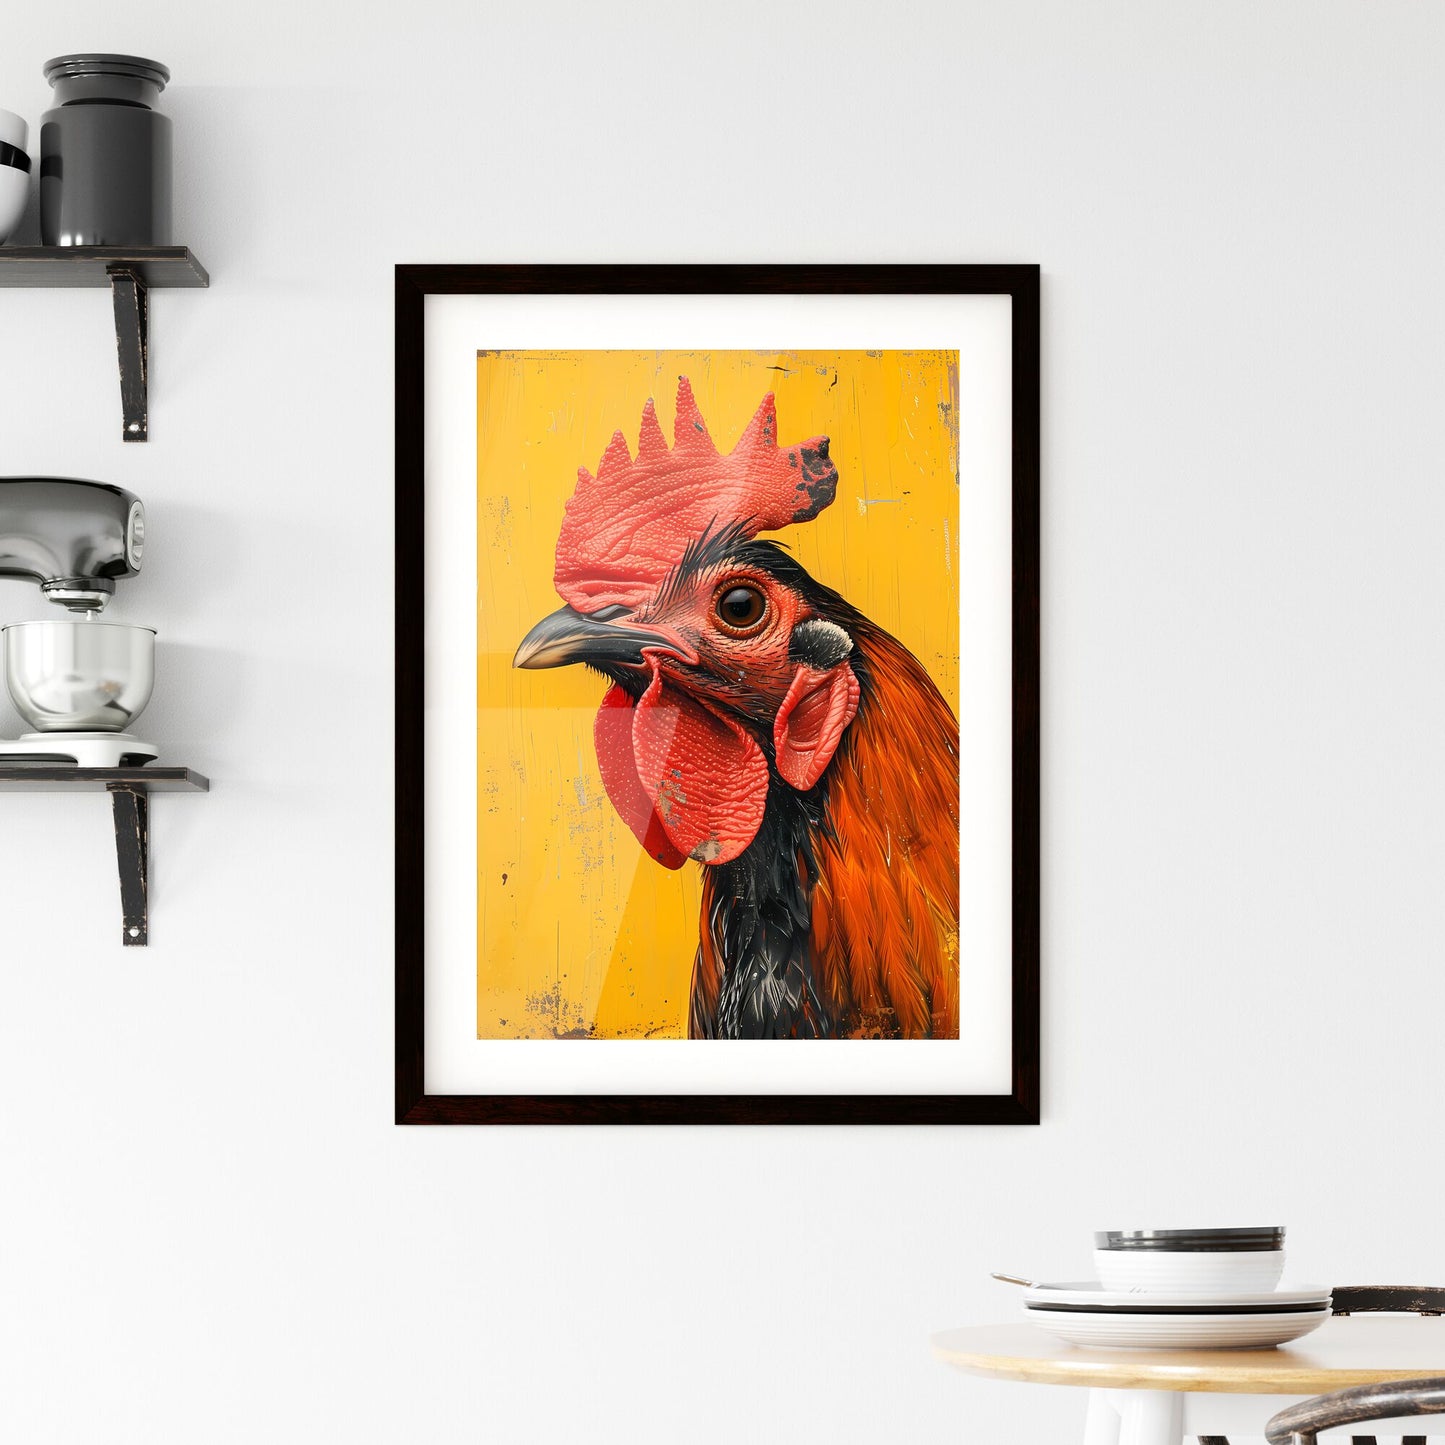 Vibrant Pop-Art Rooster Painting on Yellow Background with Focus on Art Default Title